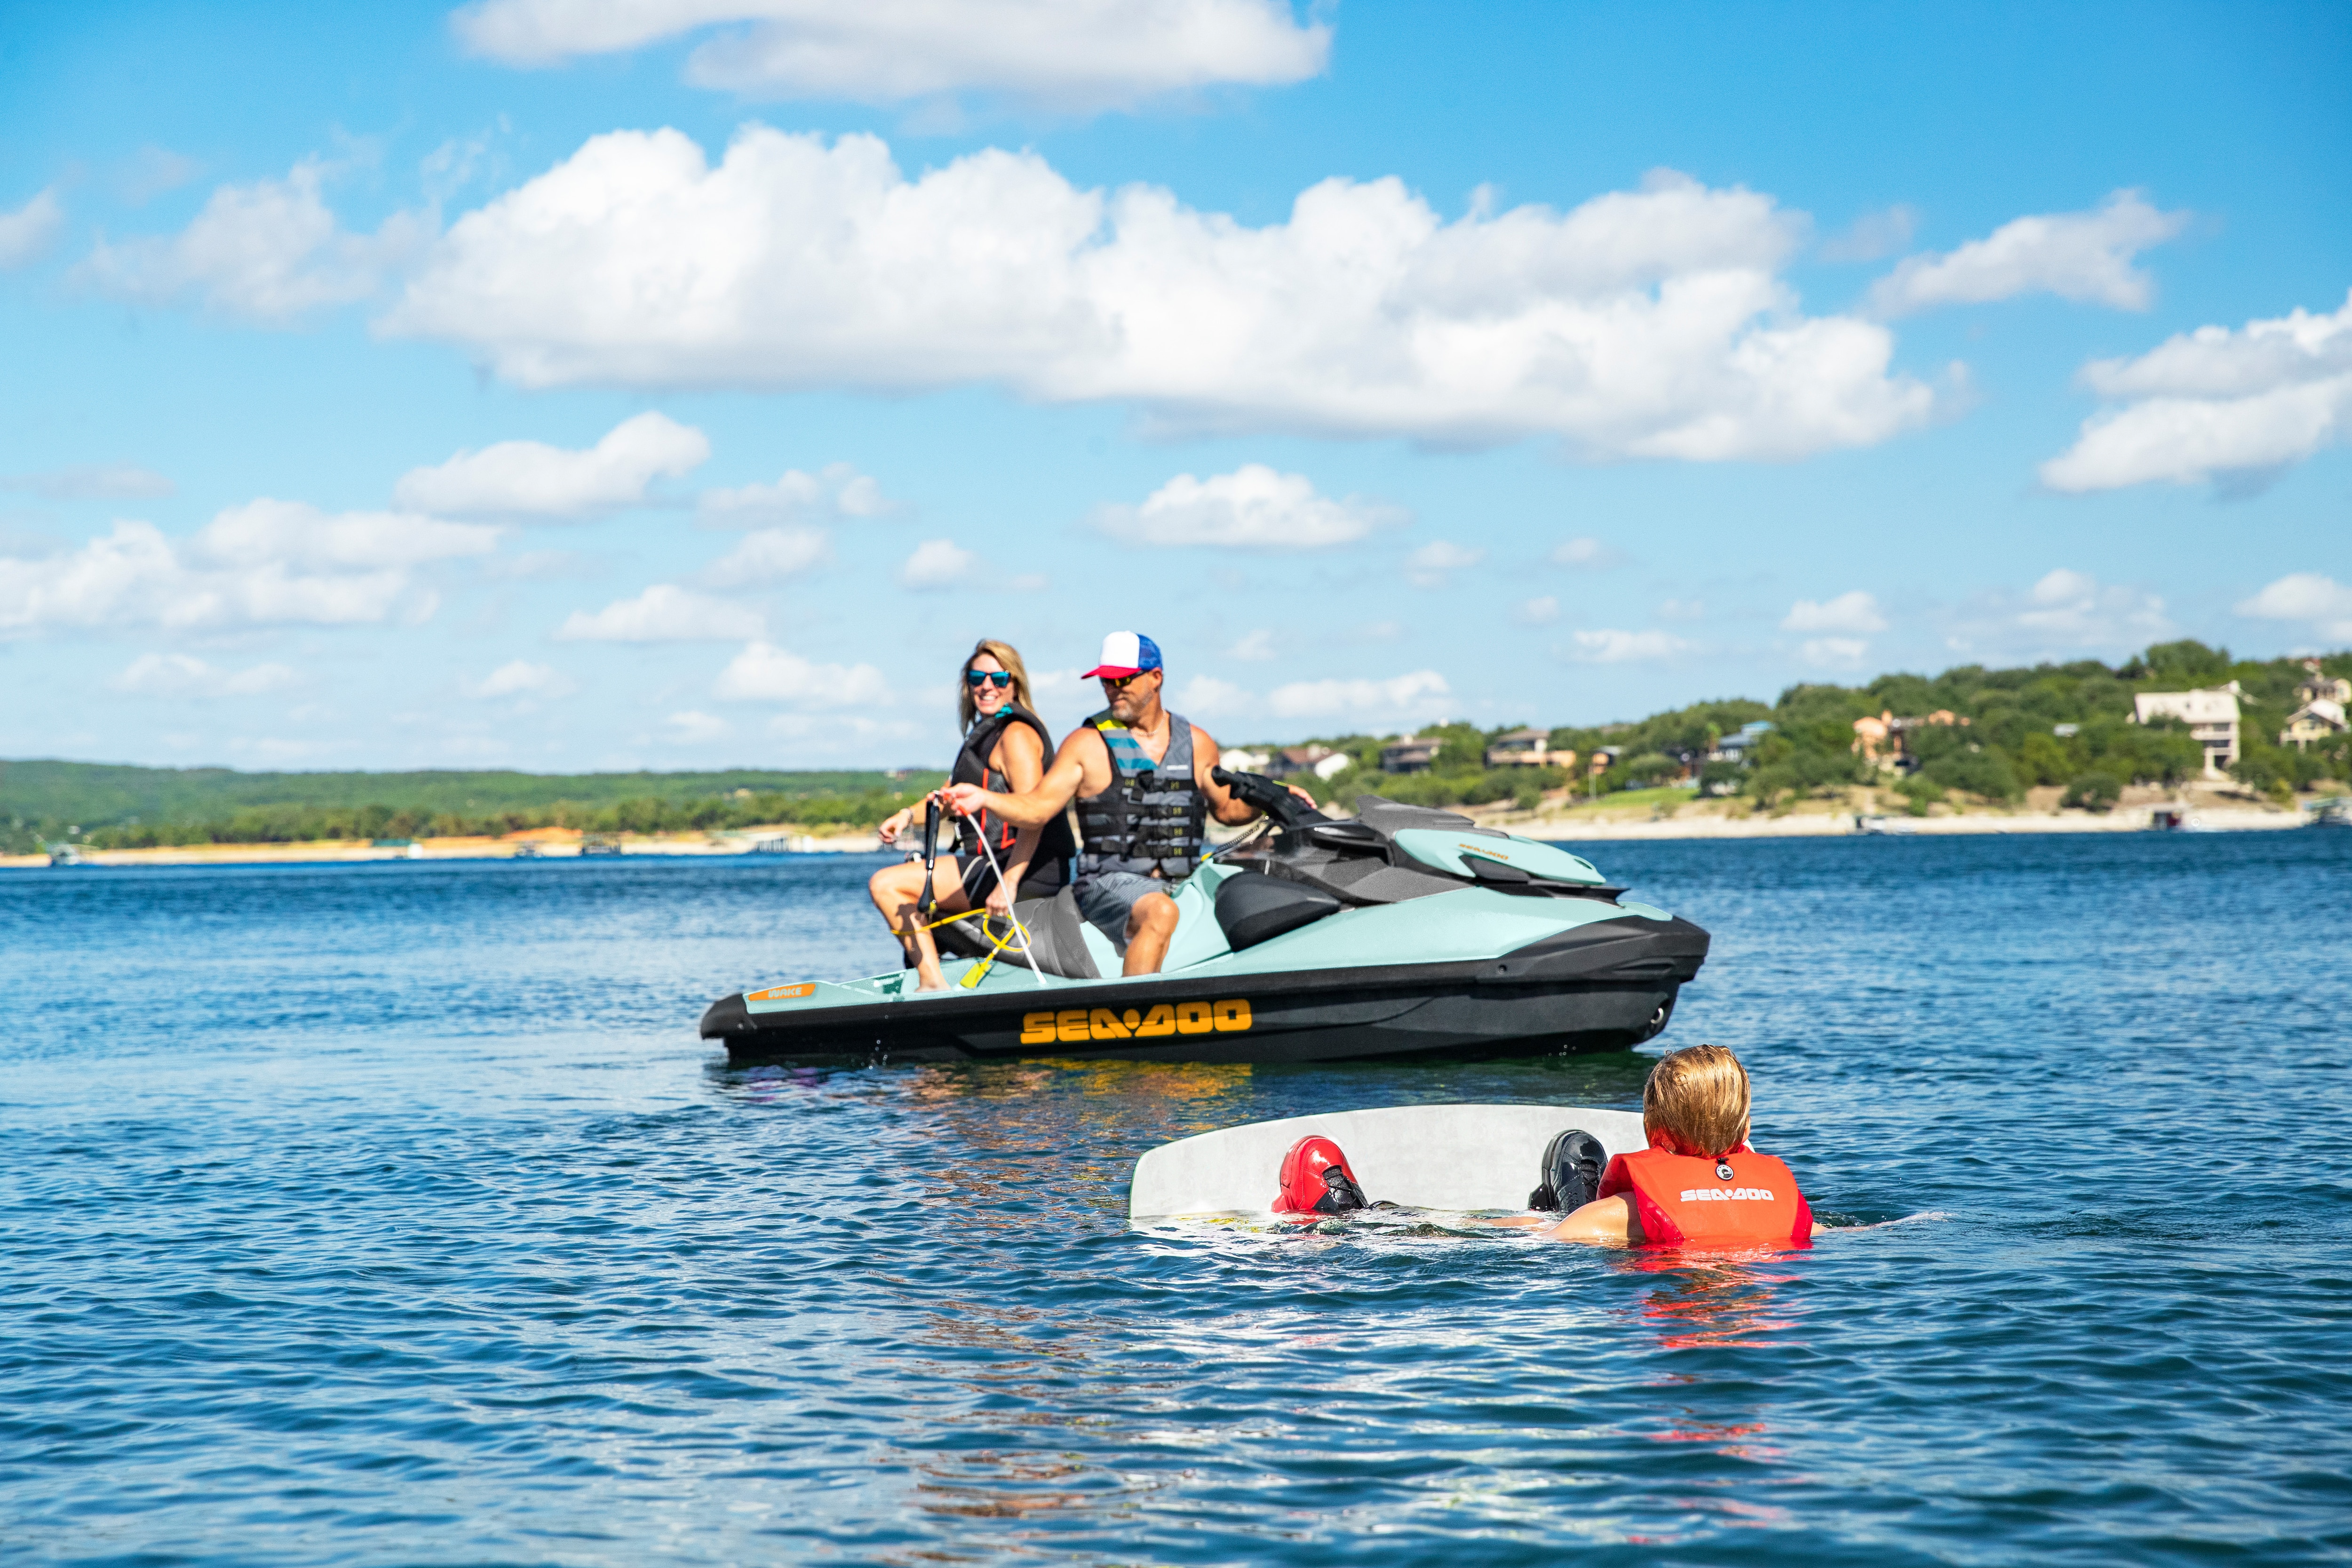 Family prepping a wakeboard ride with the Sea-Doo Wake Pro